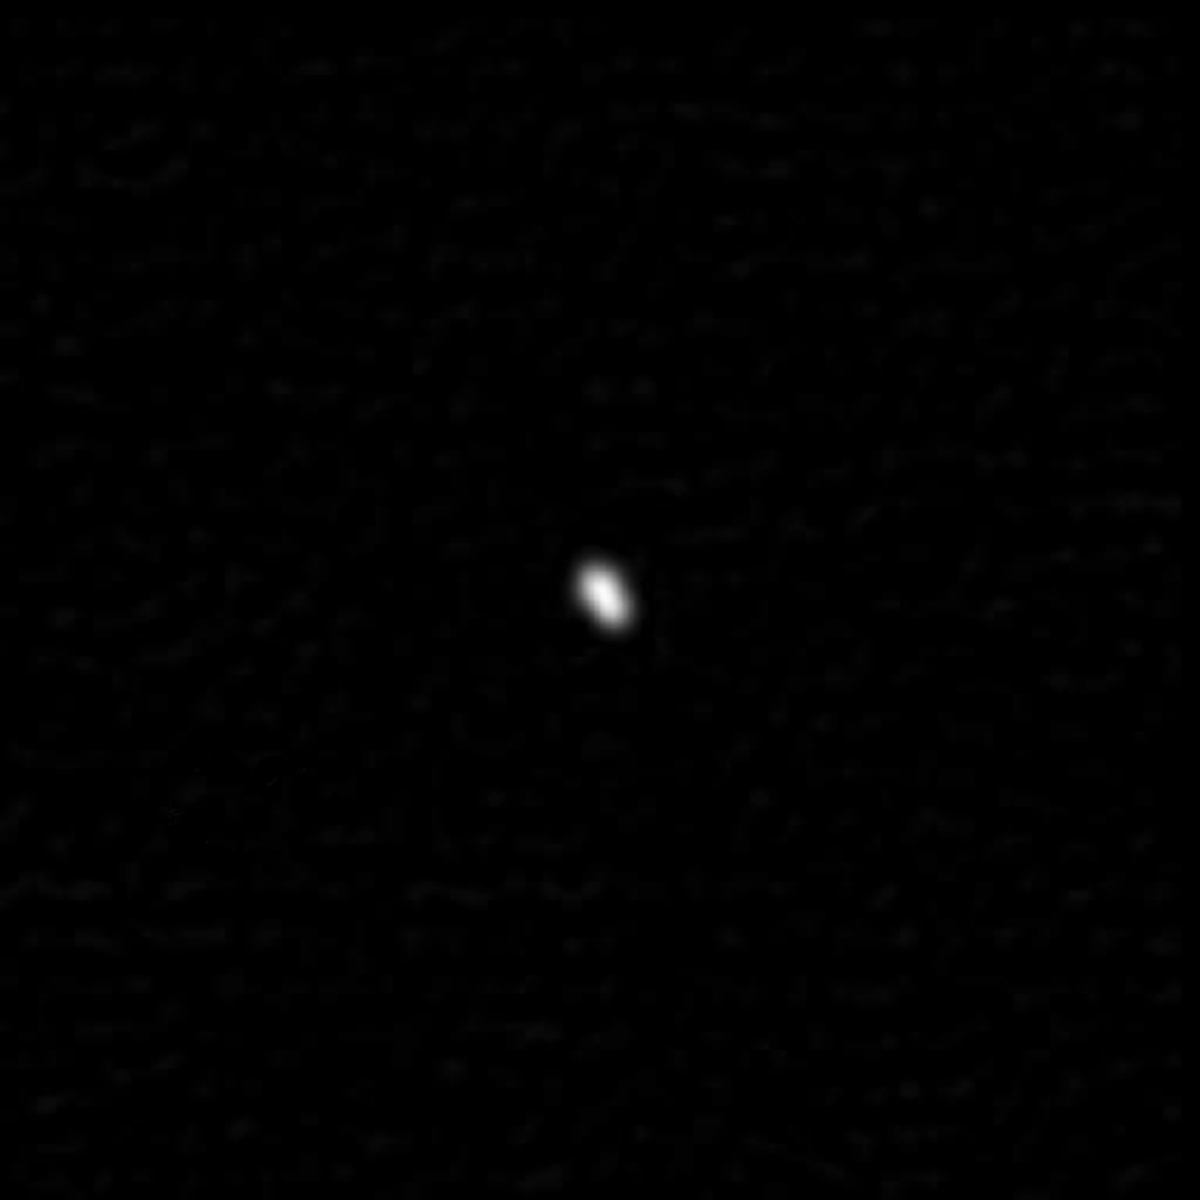 Pluto's smallest moon, Styx, appears like a small. fuzzy white dot in space.